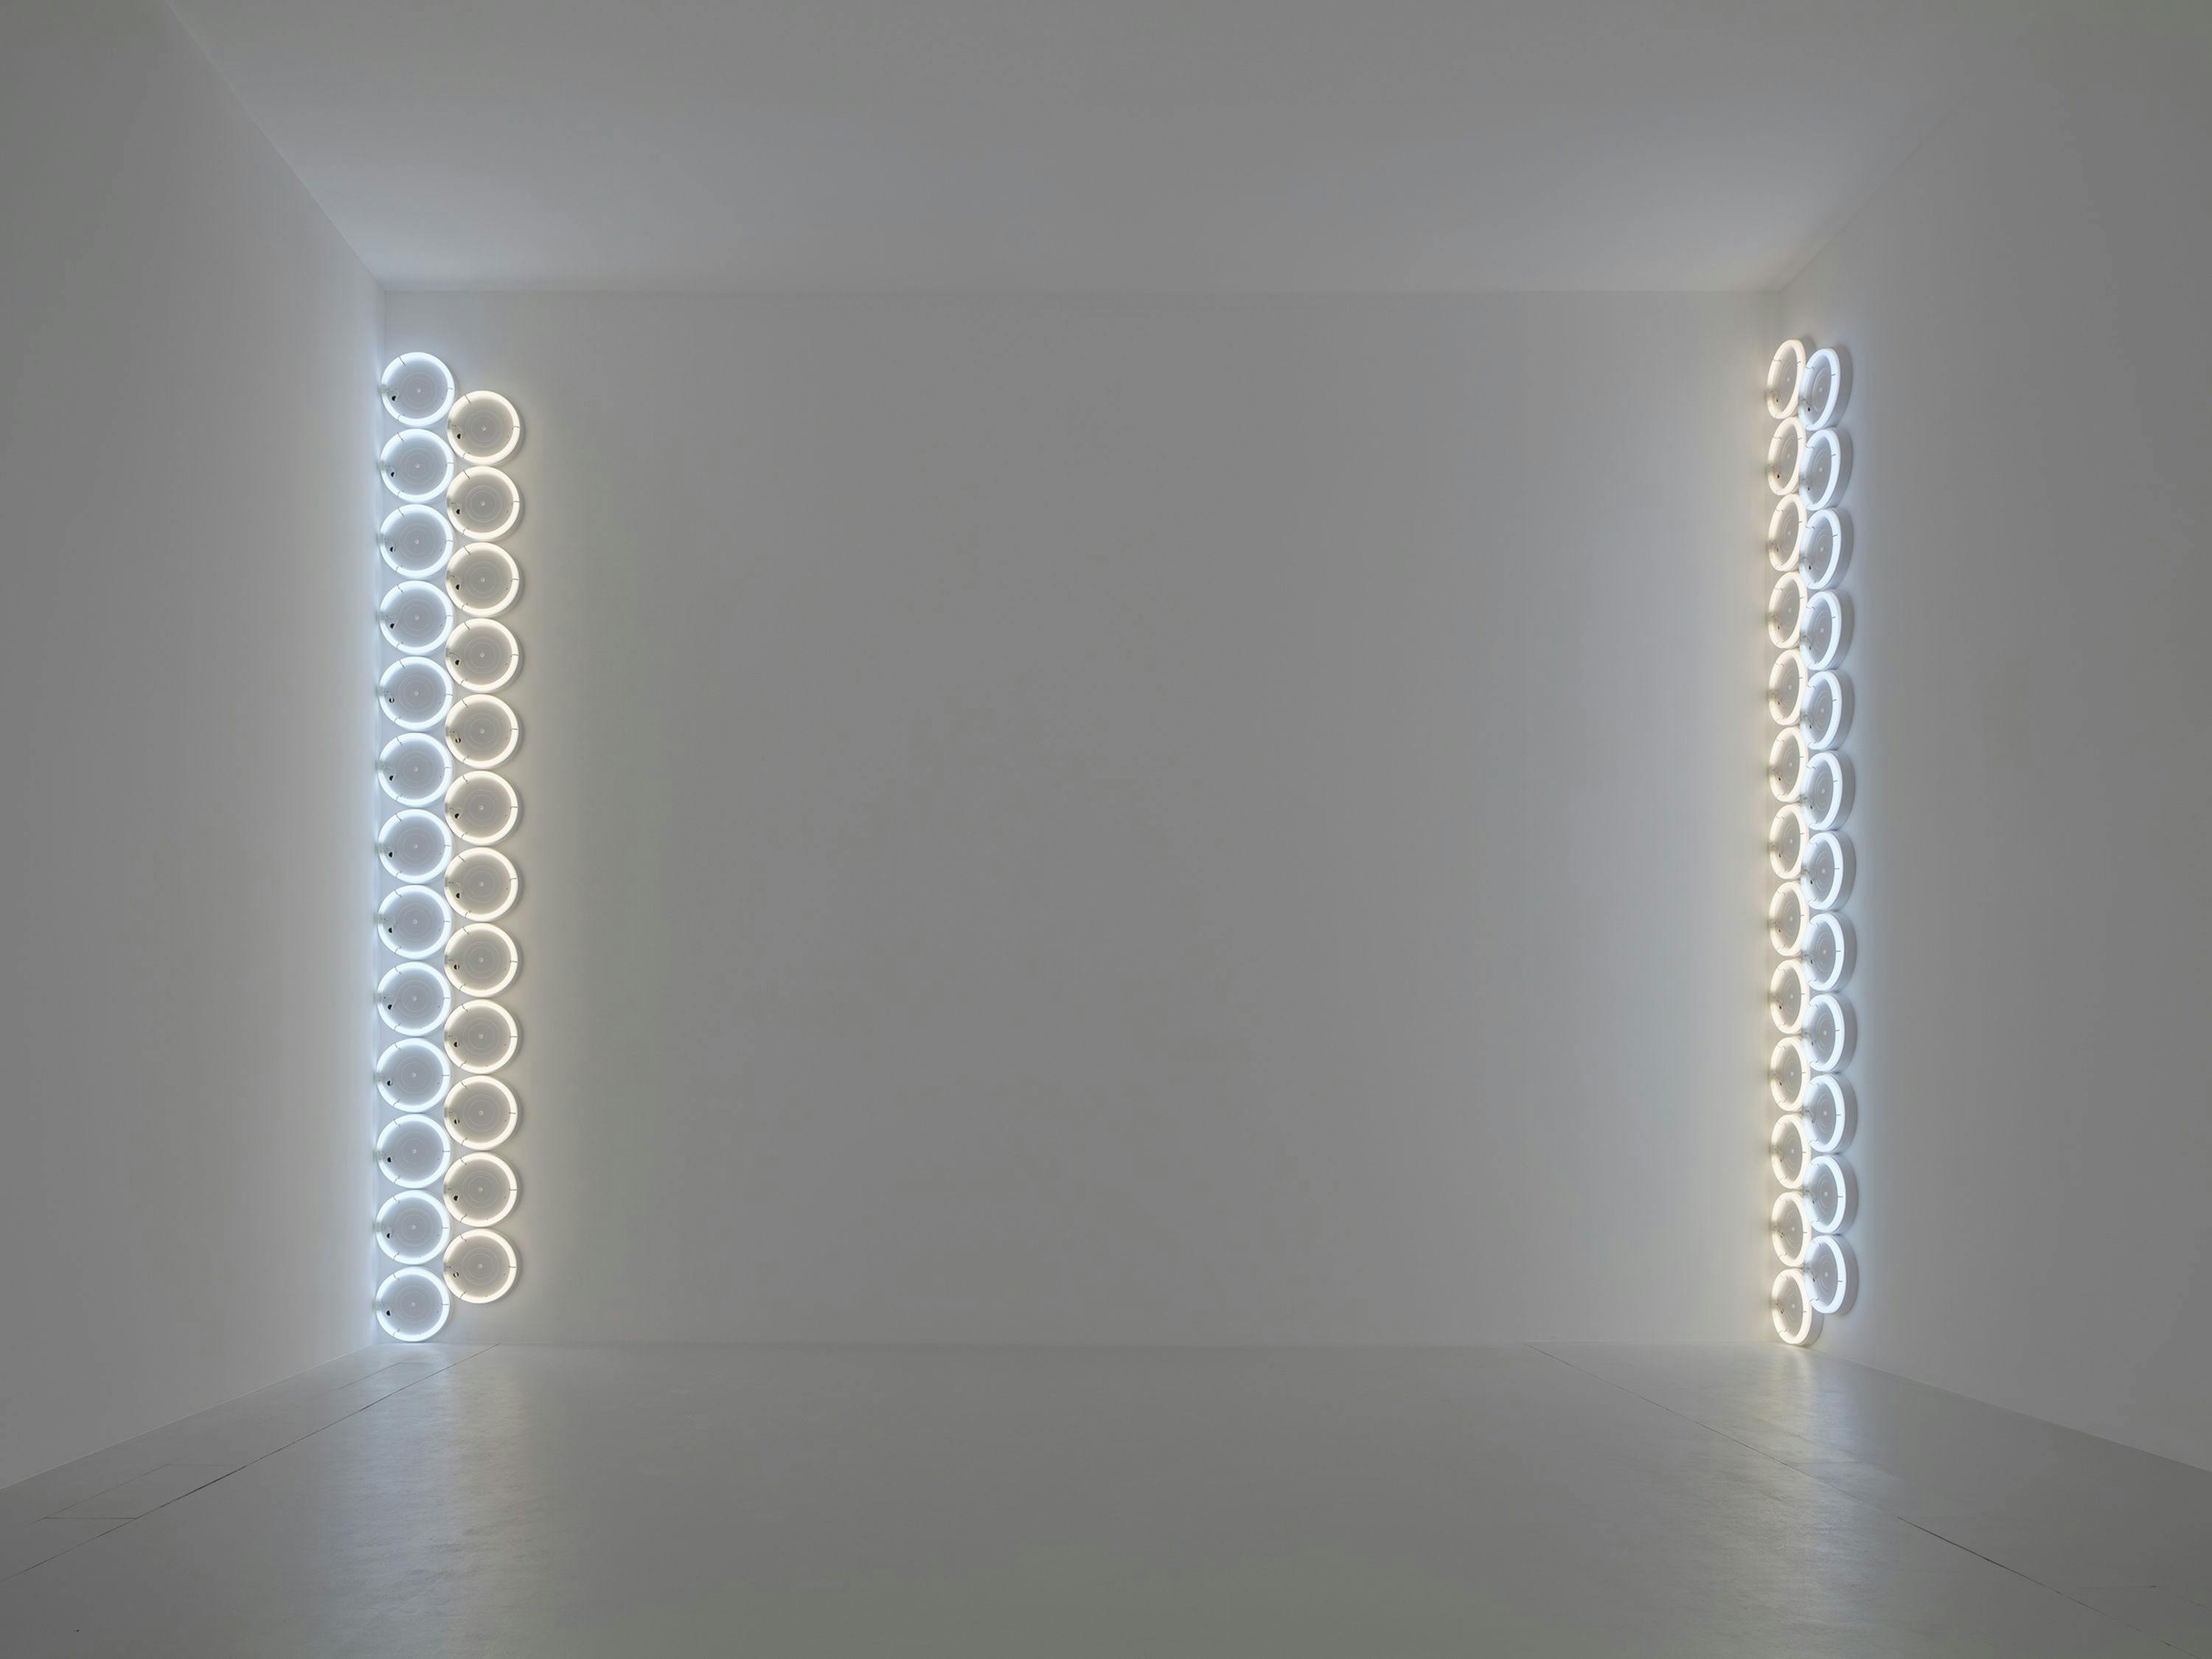 A sculpture by Dan Flavin, called untitled (to Tina and Christoph and their Palladio), dated 1972 to 1973.